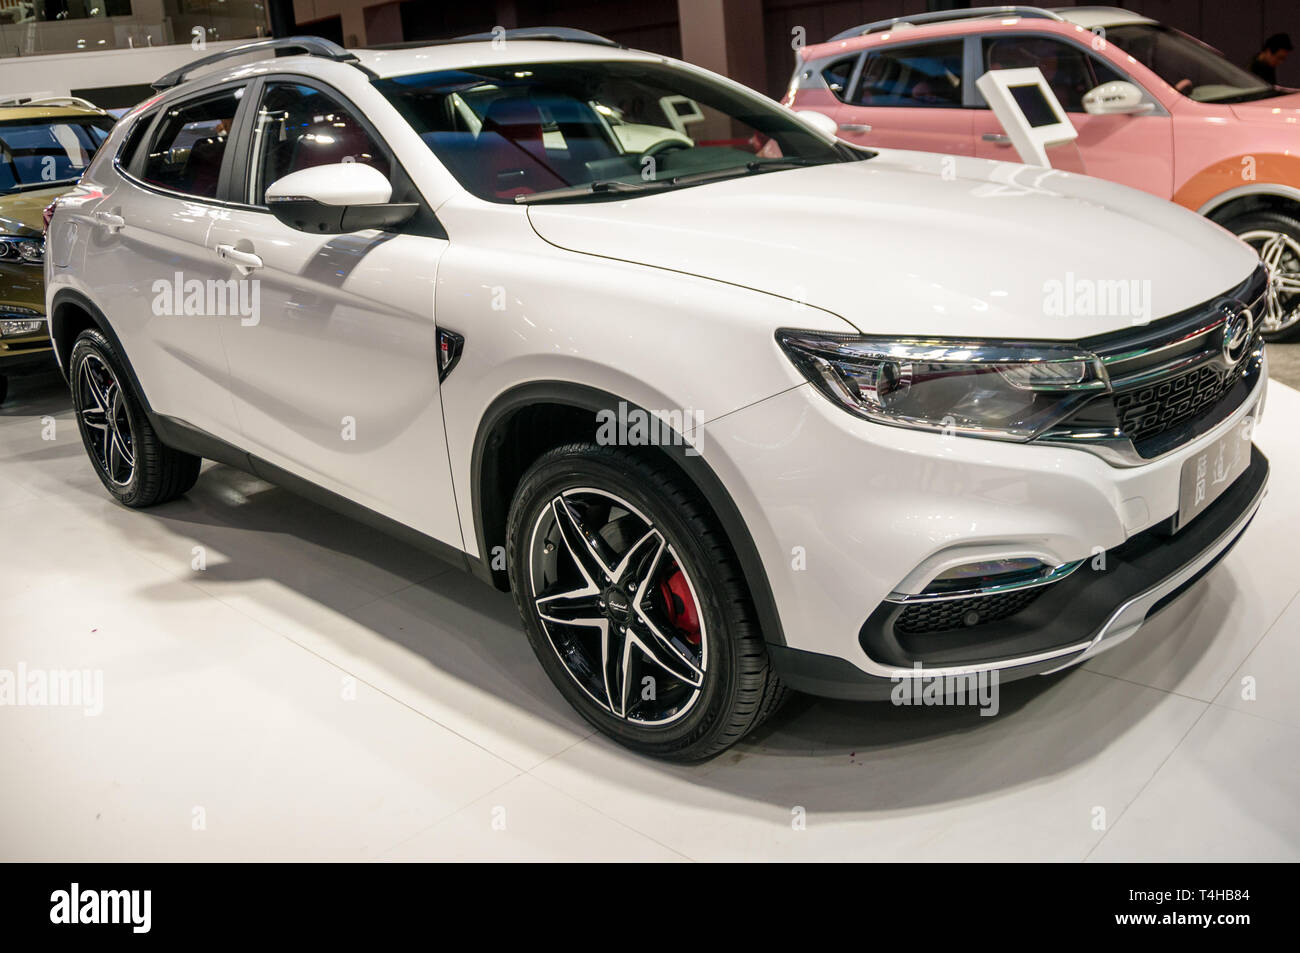 Landwind GT01 SUV formerly known as E315 unveiled at the 2019 Shanghai Auto Show. Stock Photo